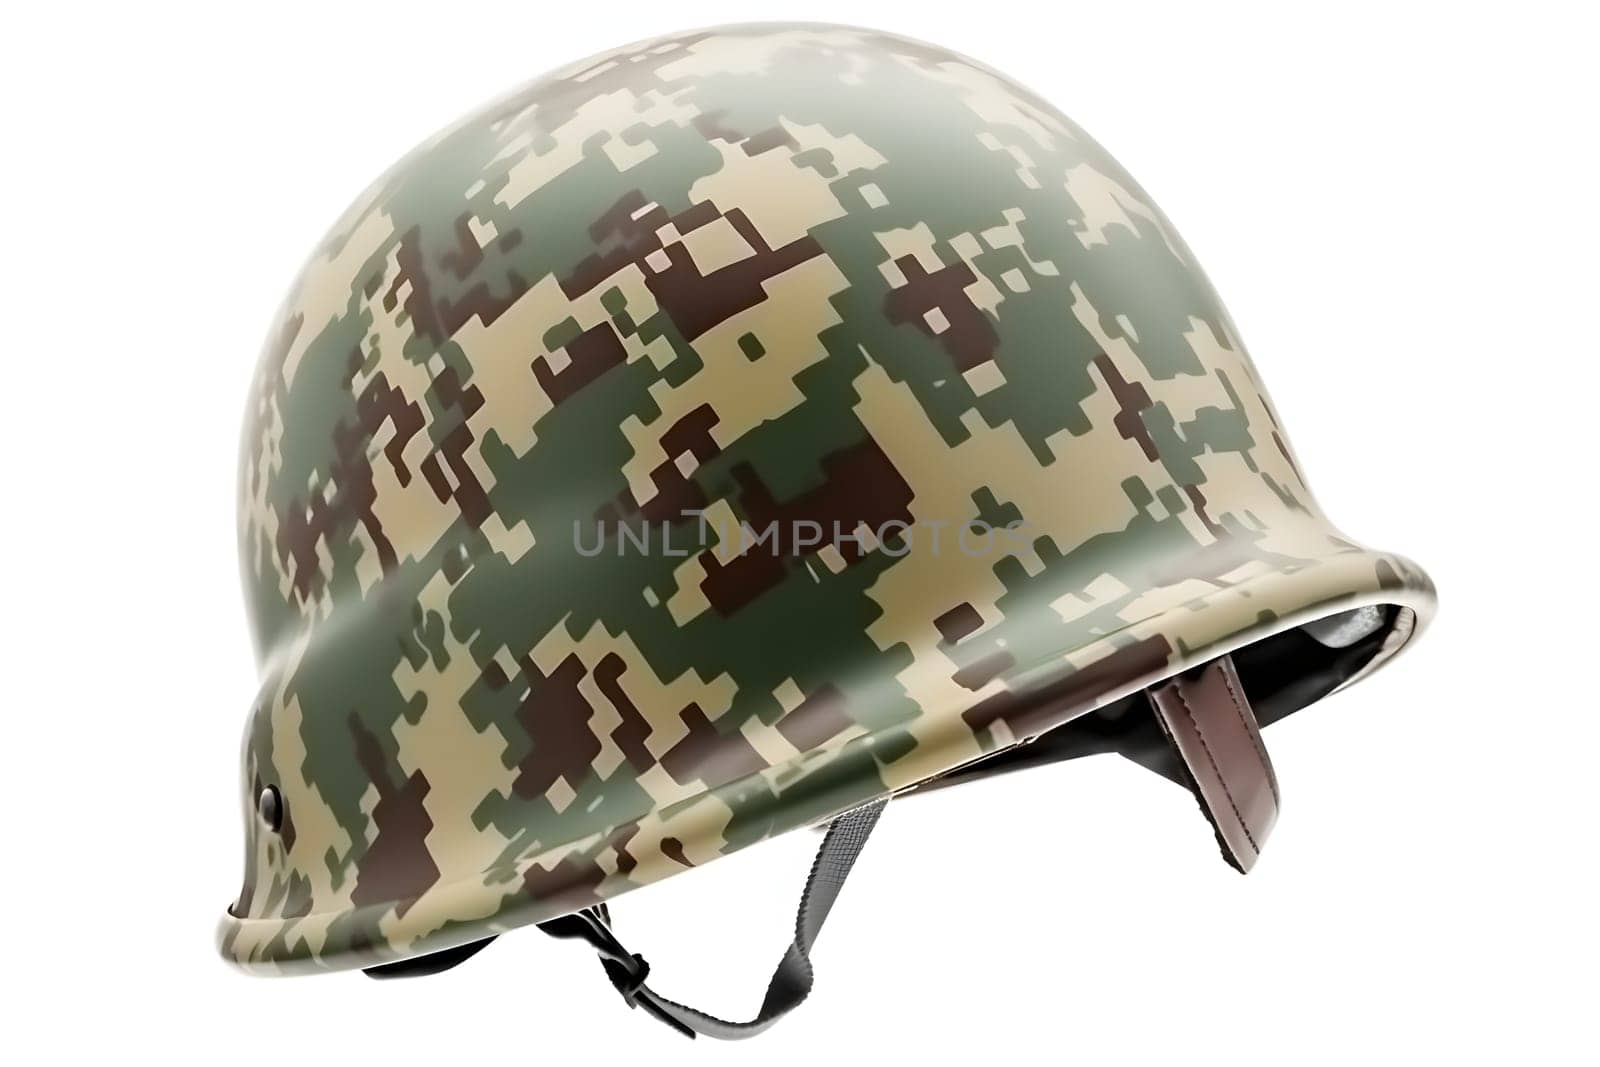 20-th century combat infantry helmet on white background, neural network generated image by z1b